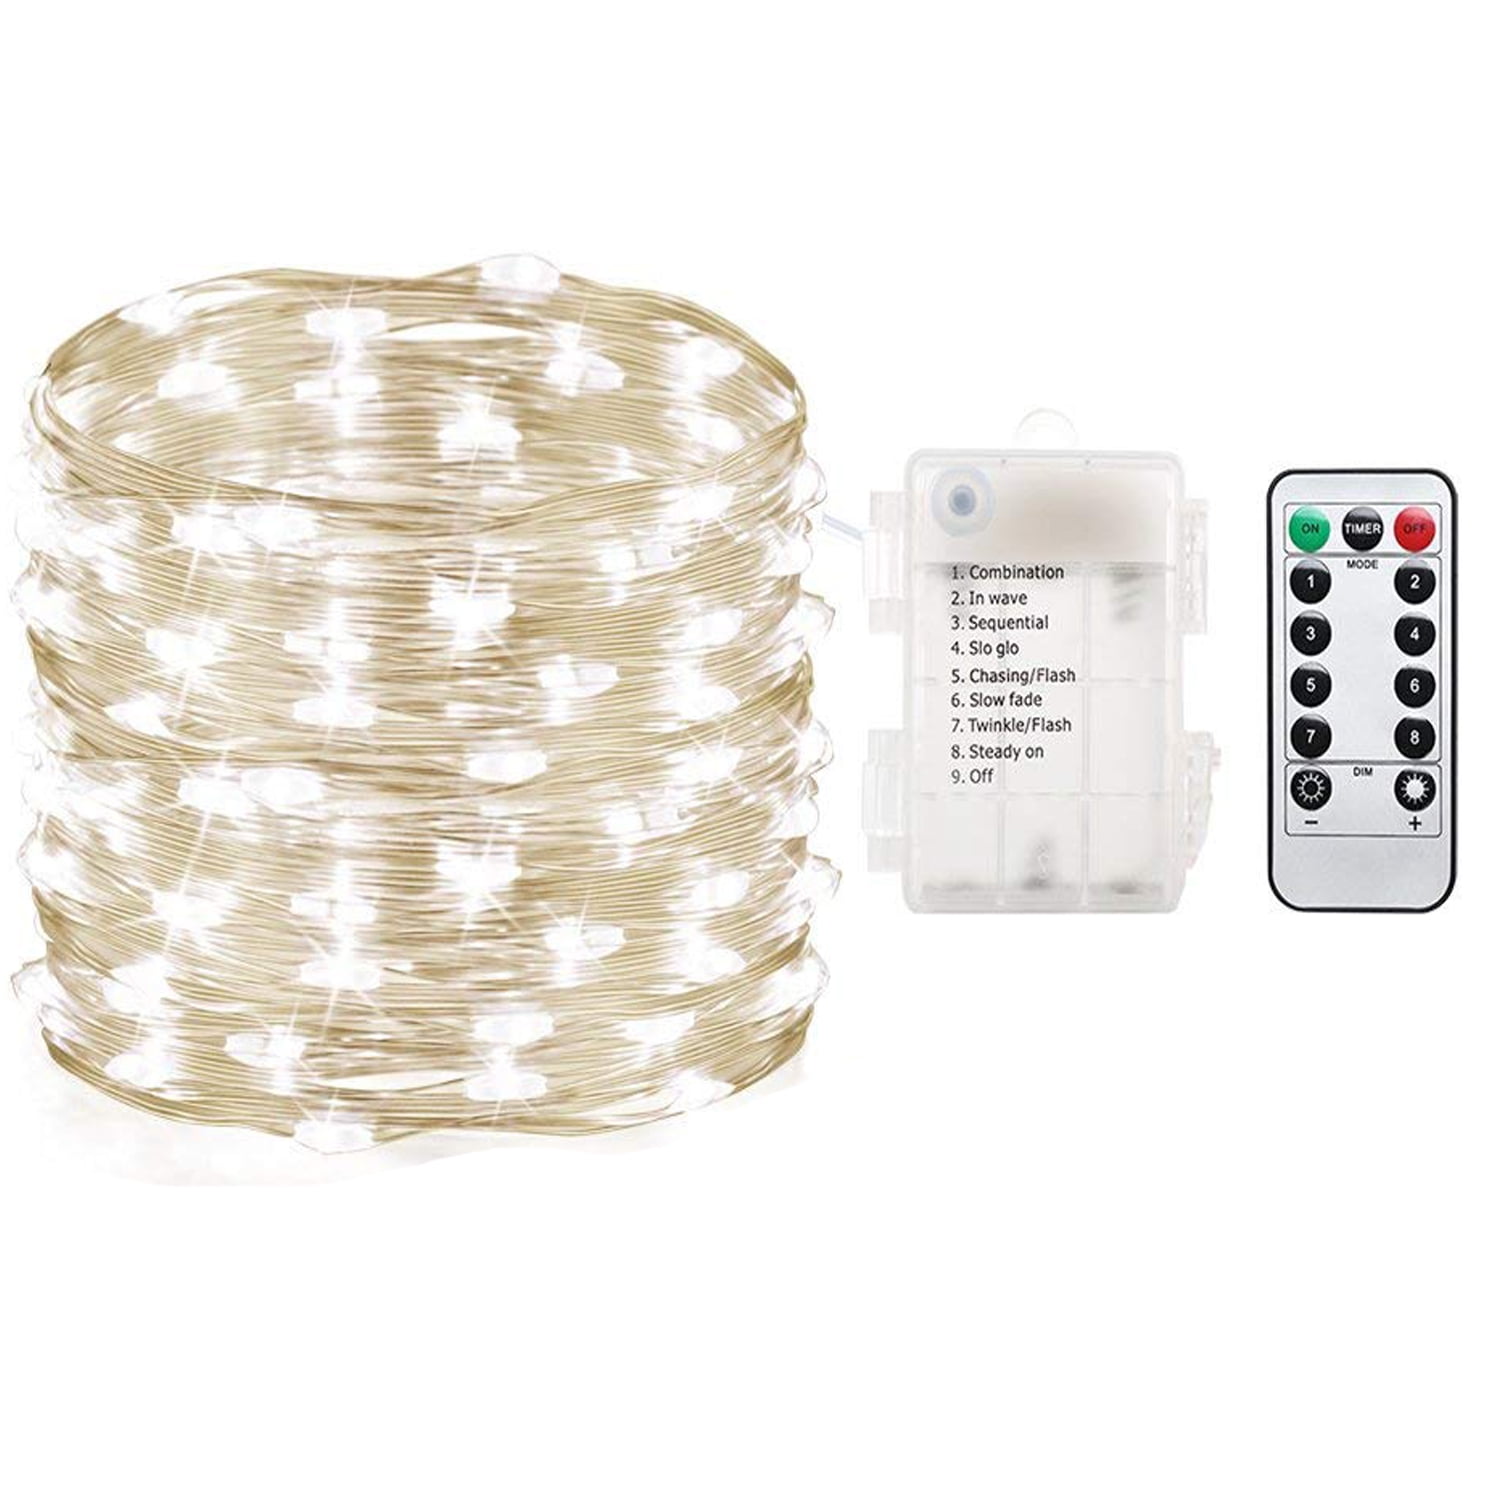 50/100/200 LED Fairy String Lights Battery Powered Copper Wire Remote Control 